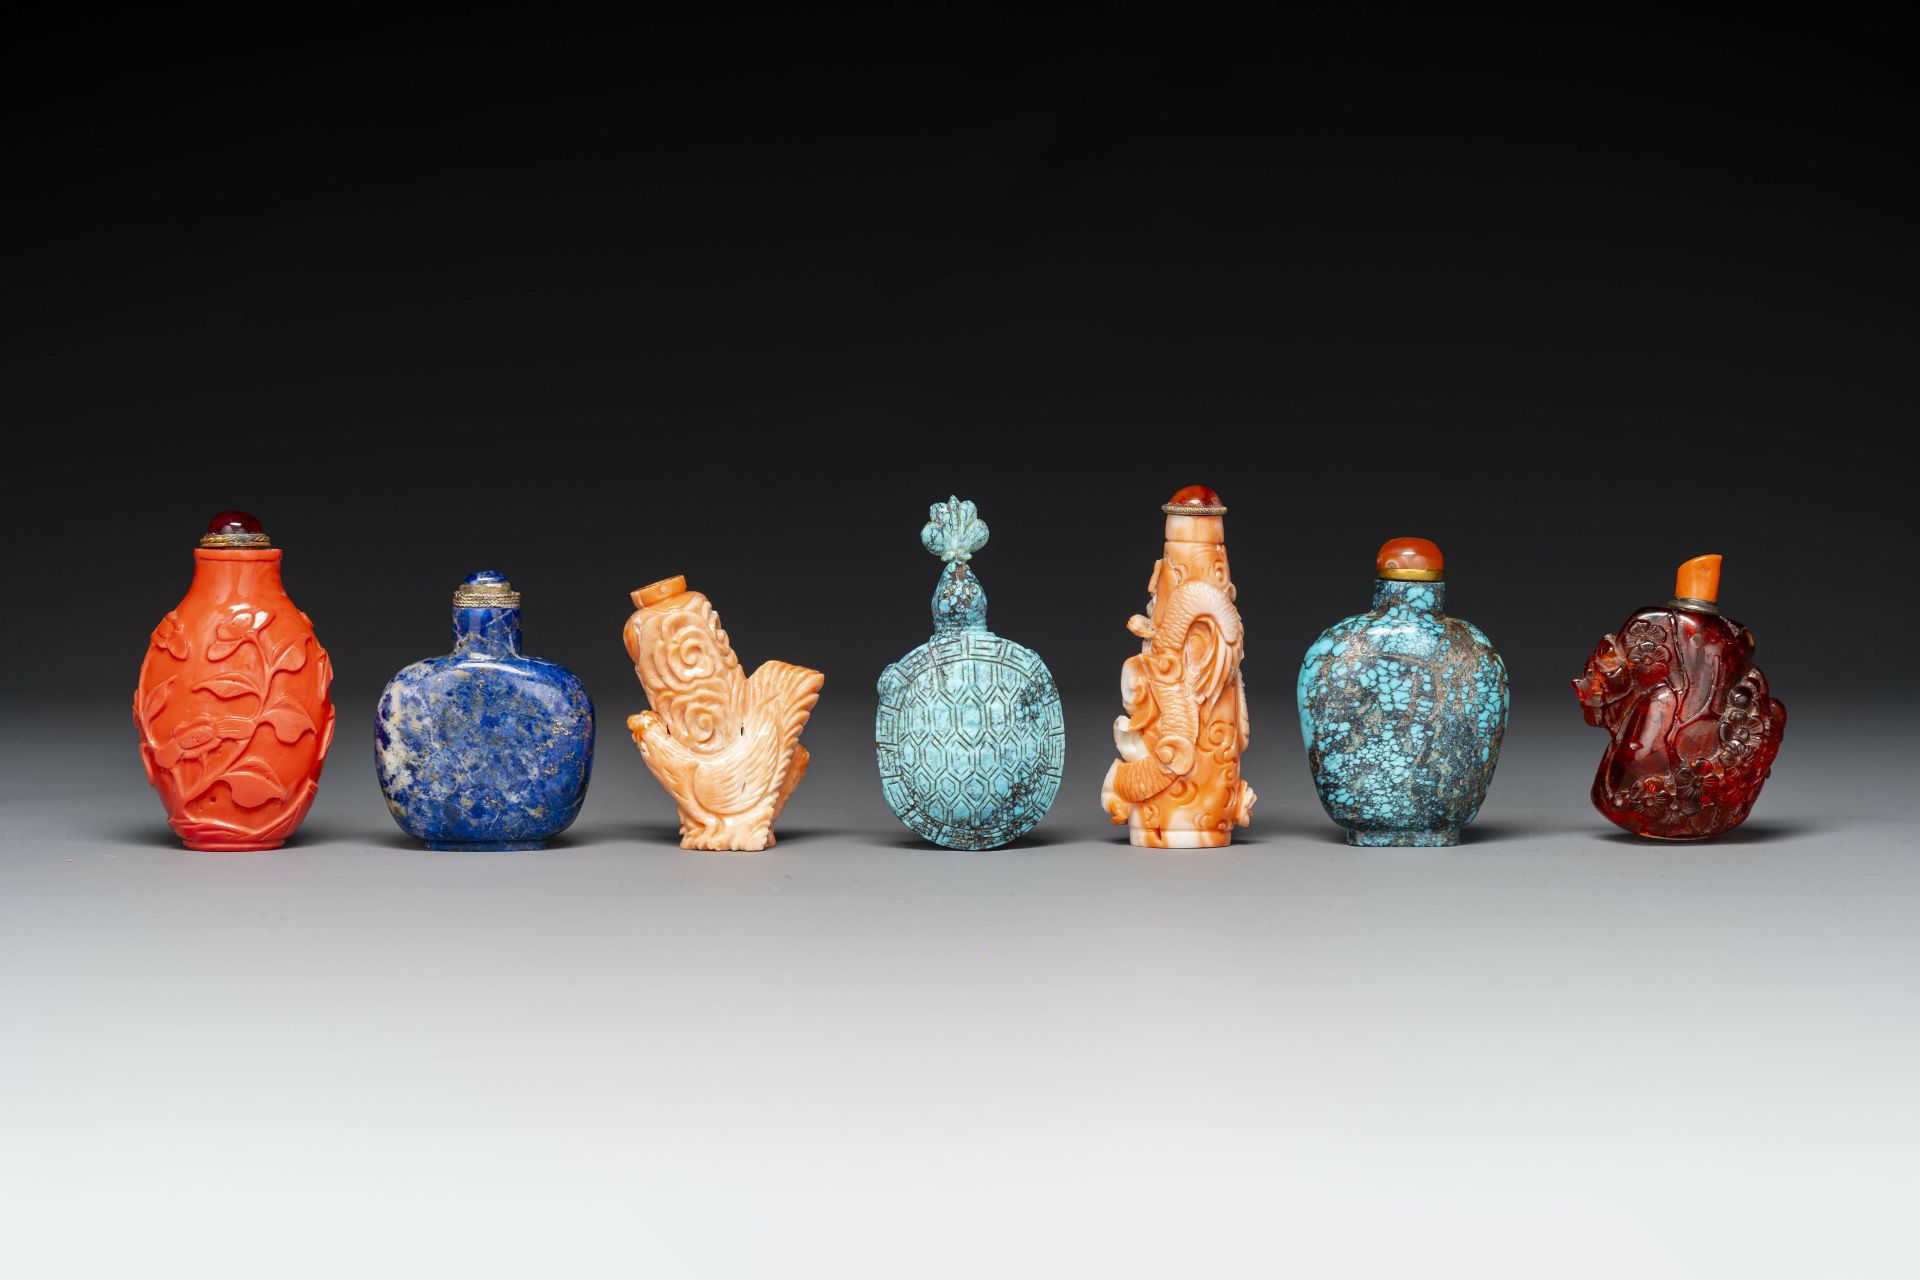 Seven varied Chinese snuff bottles of precious stone, red coral, glass and amber, 19th C. - Image 5 of 7